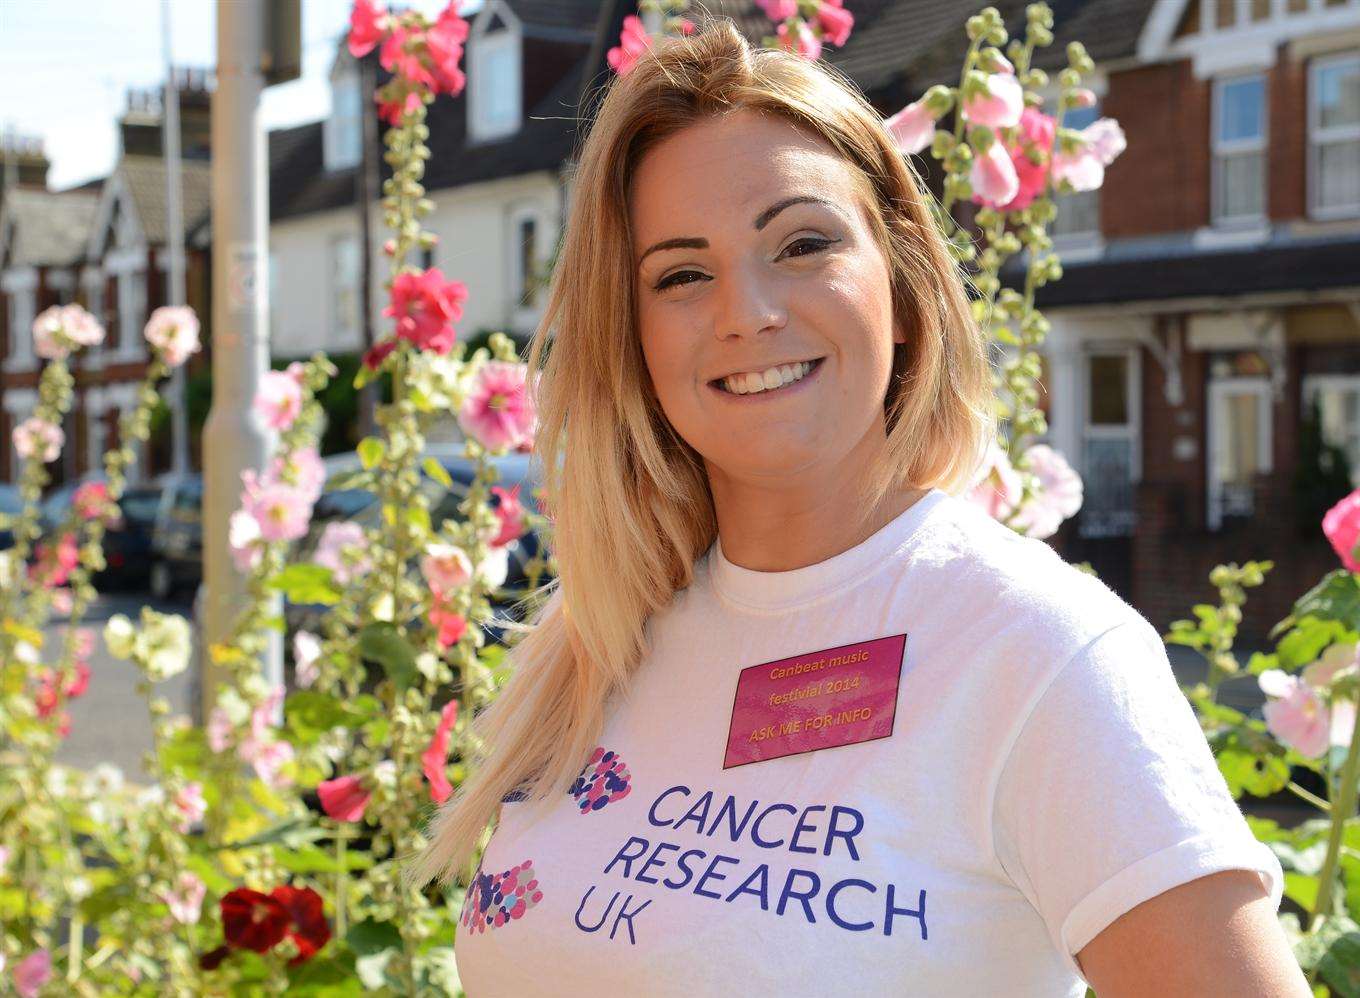 Sabrina Smith is organising Canbeat Music Festival to raise money for Cancer Research UK